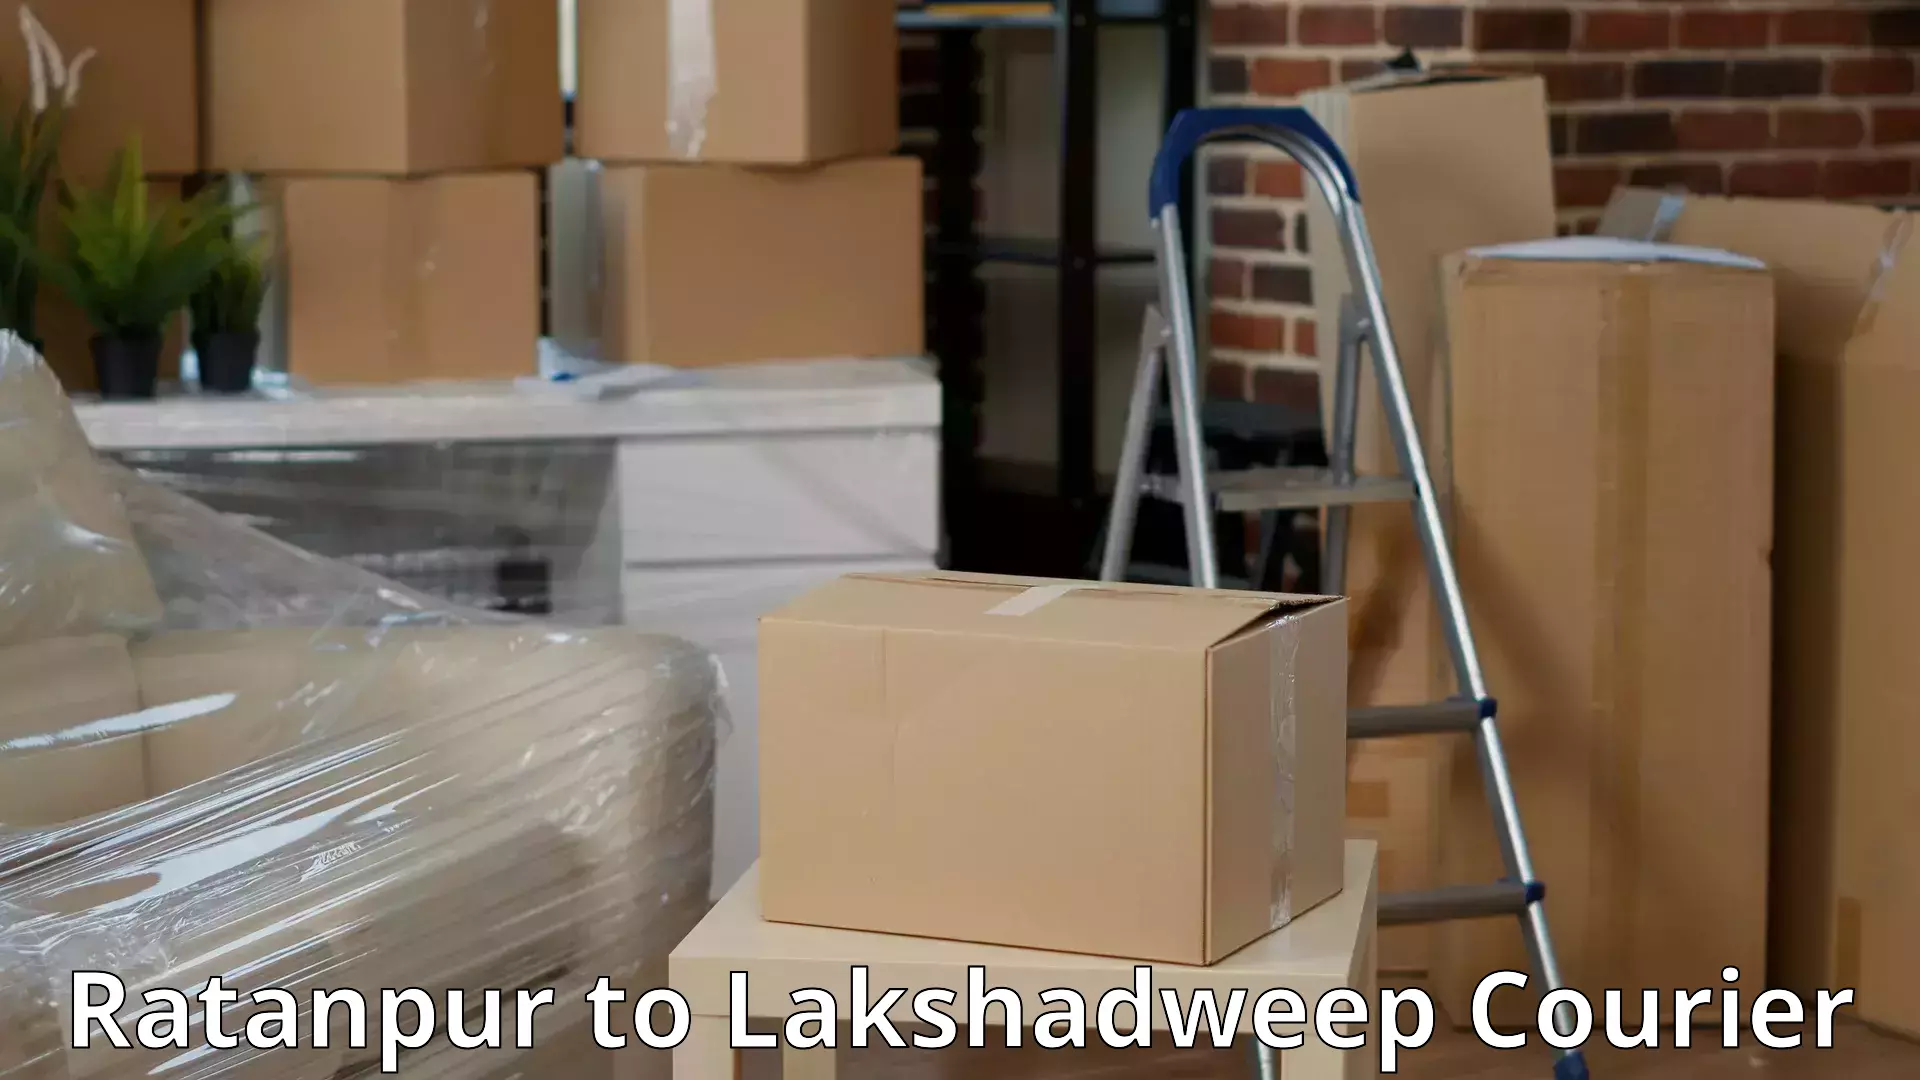 Furniture relocation experts Ratanpur to Lakshadweep